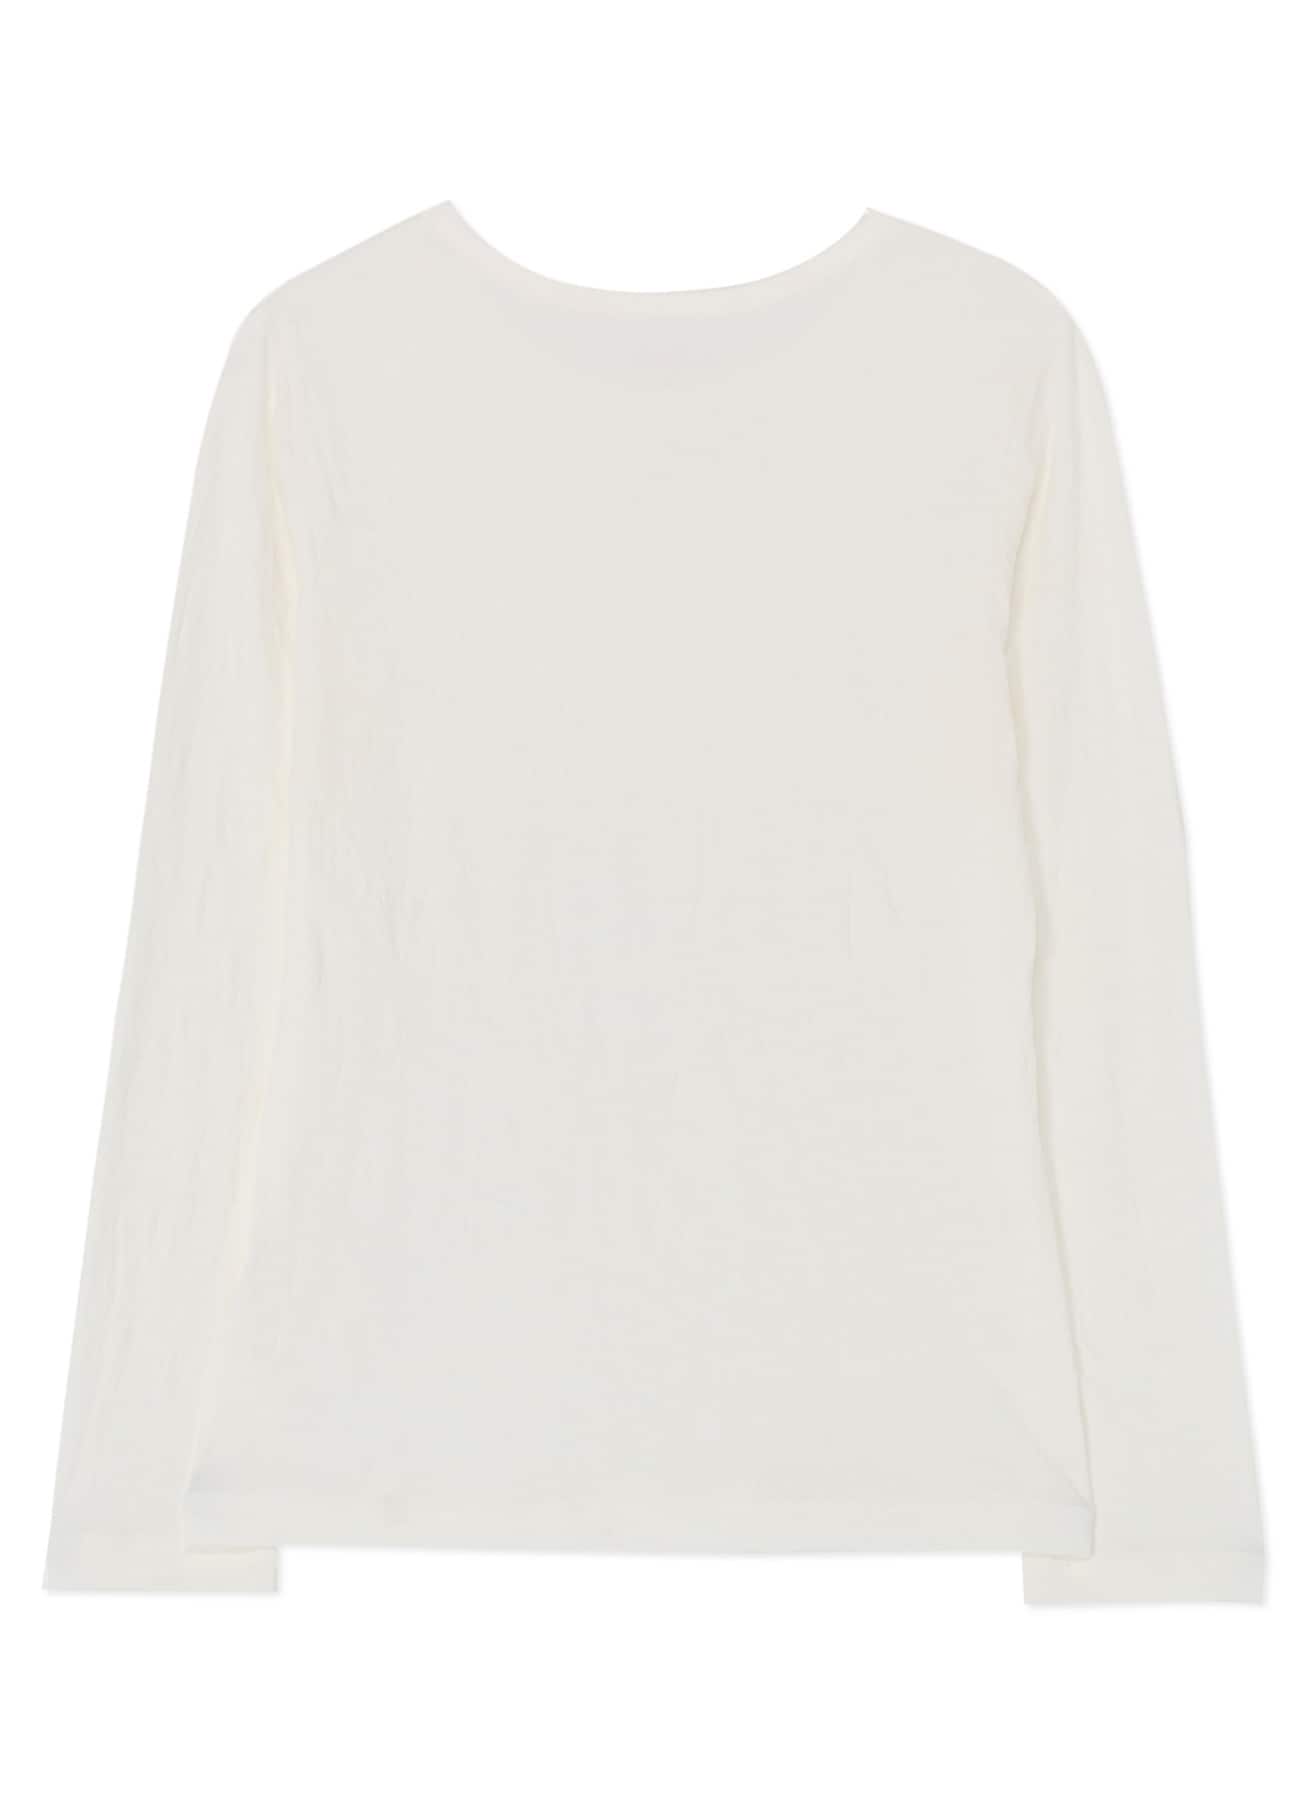 WRINKLED COTTON ROUND NECK LONG SLEEVE T-SHIRT(S Off White 